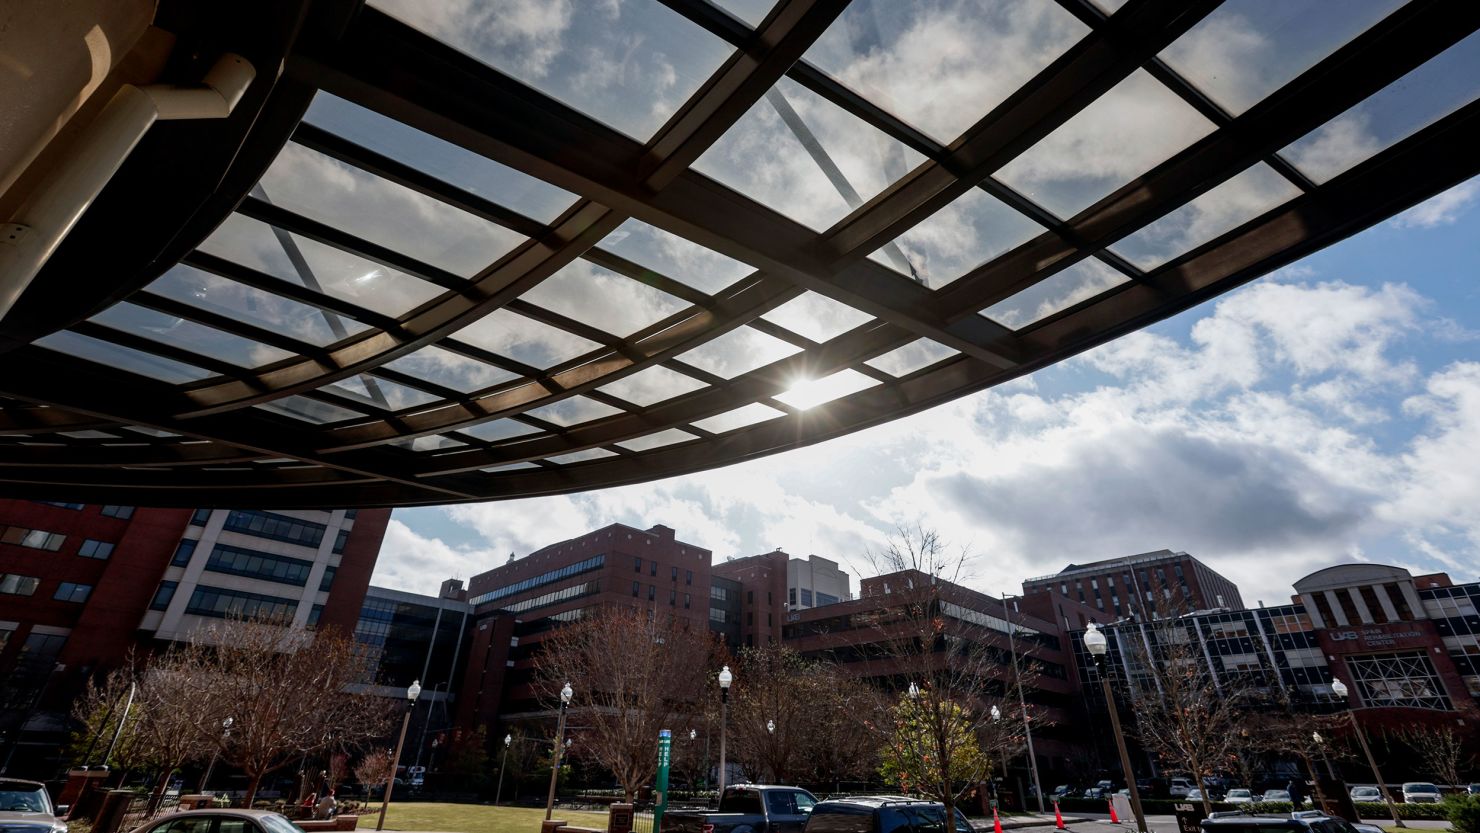 The sun shines through an awning at The University of Alabama at Birmingham Women's and Infant Center in Birmingham, Alabama, on Wednesday, March 23, 2022.